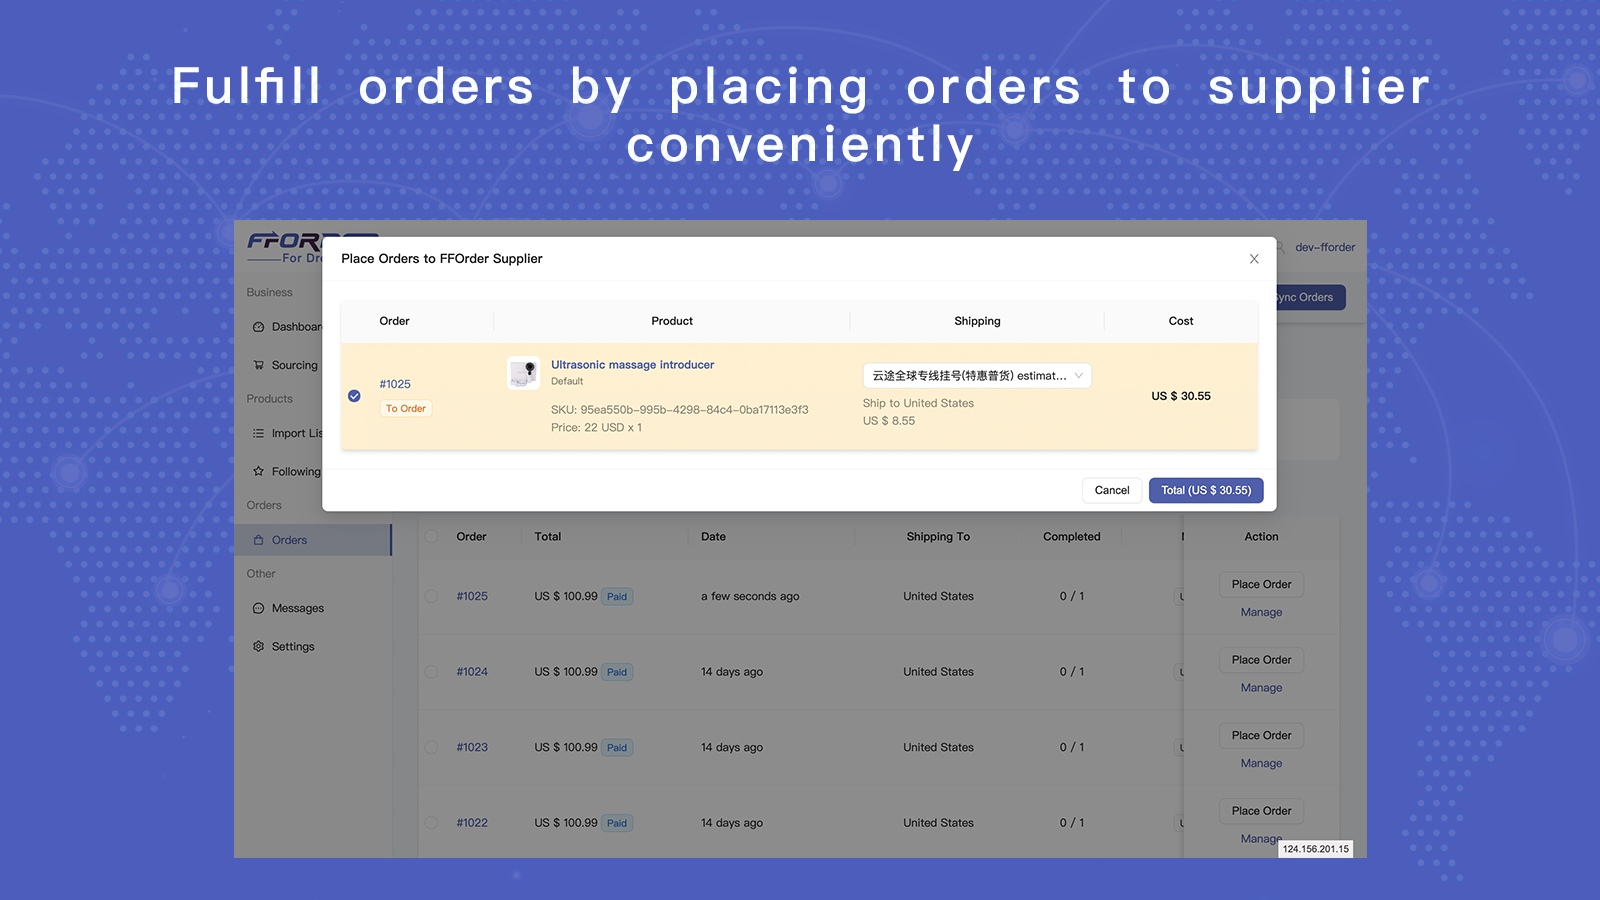 Fulfill orders by placing orders to supplier conveniently